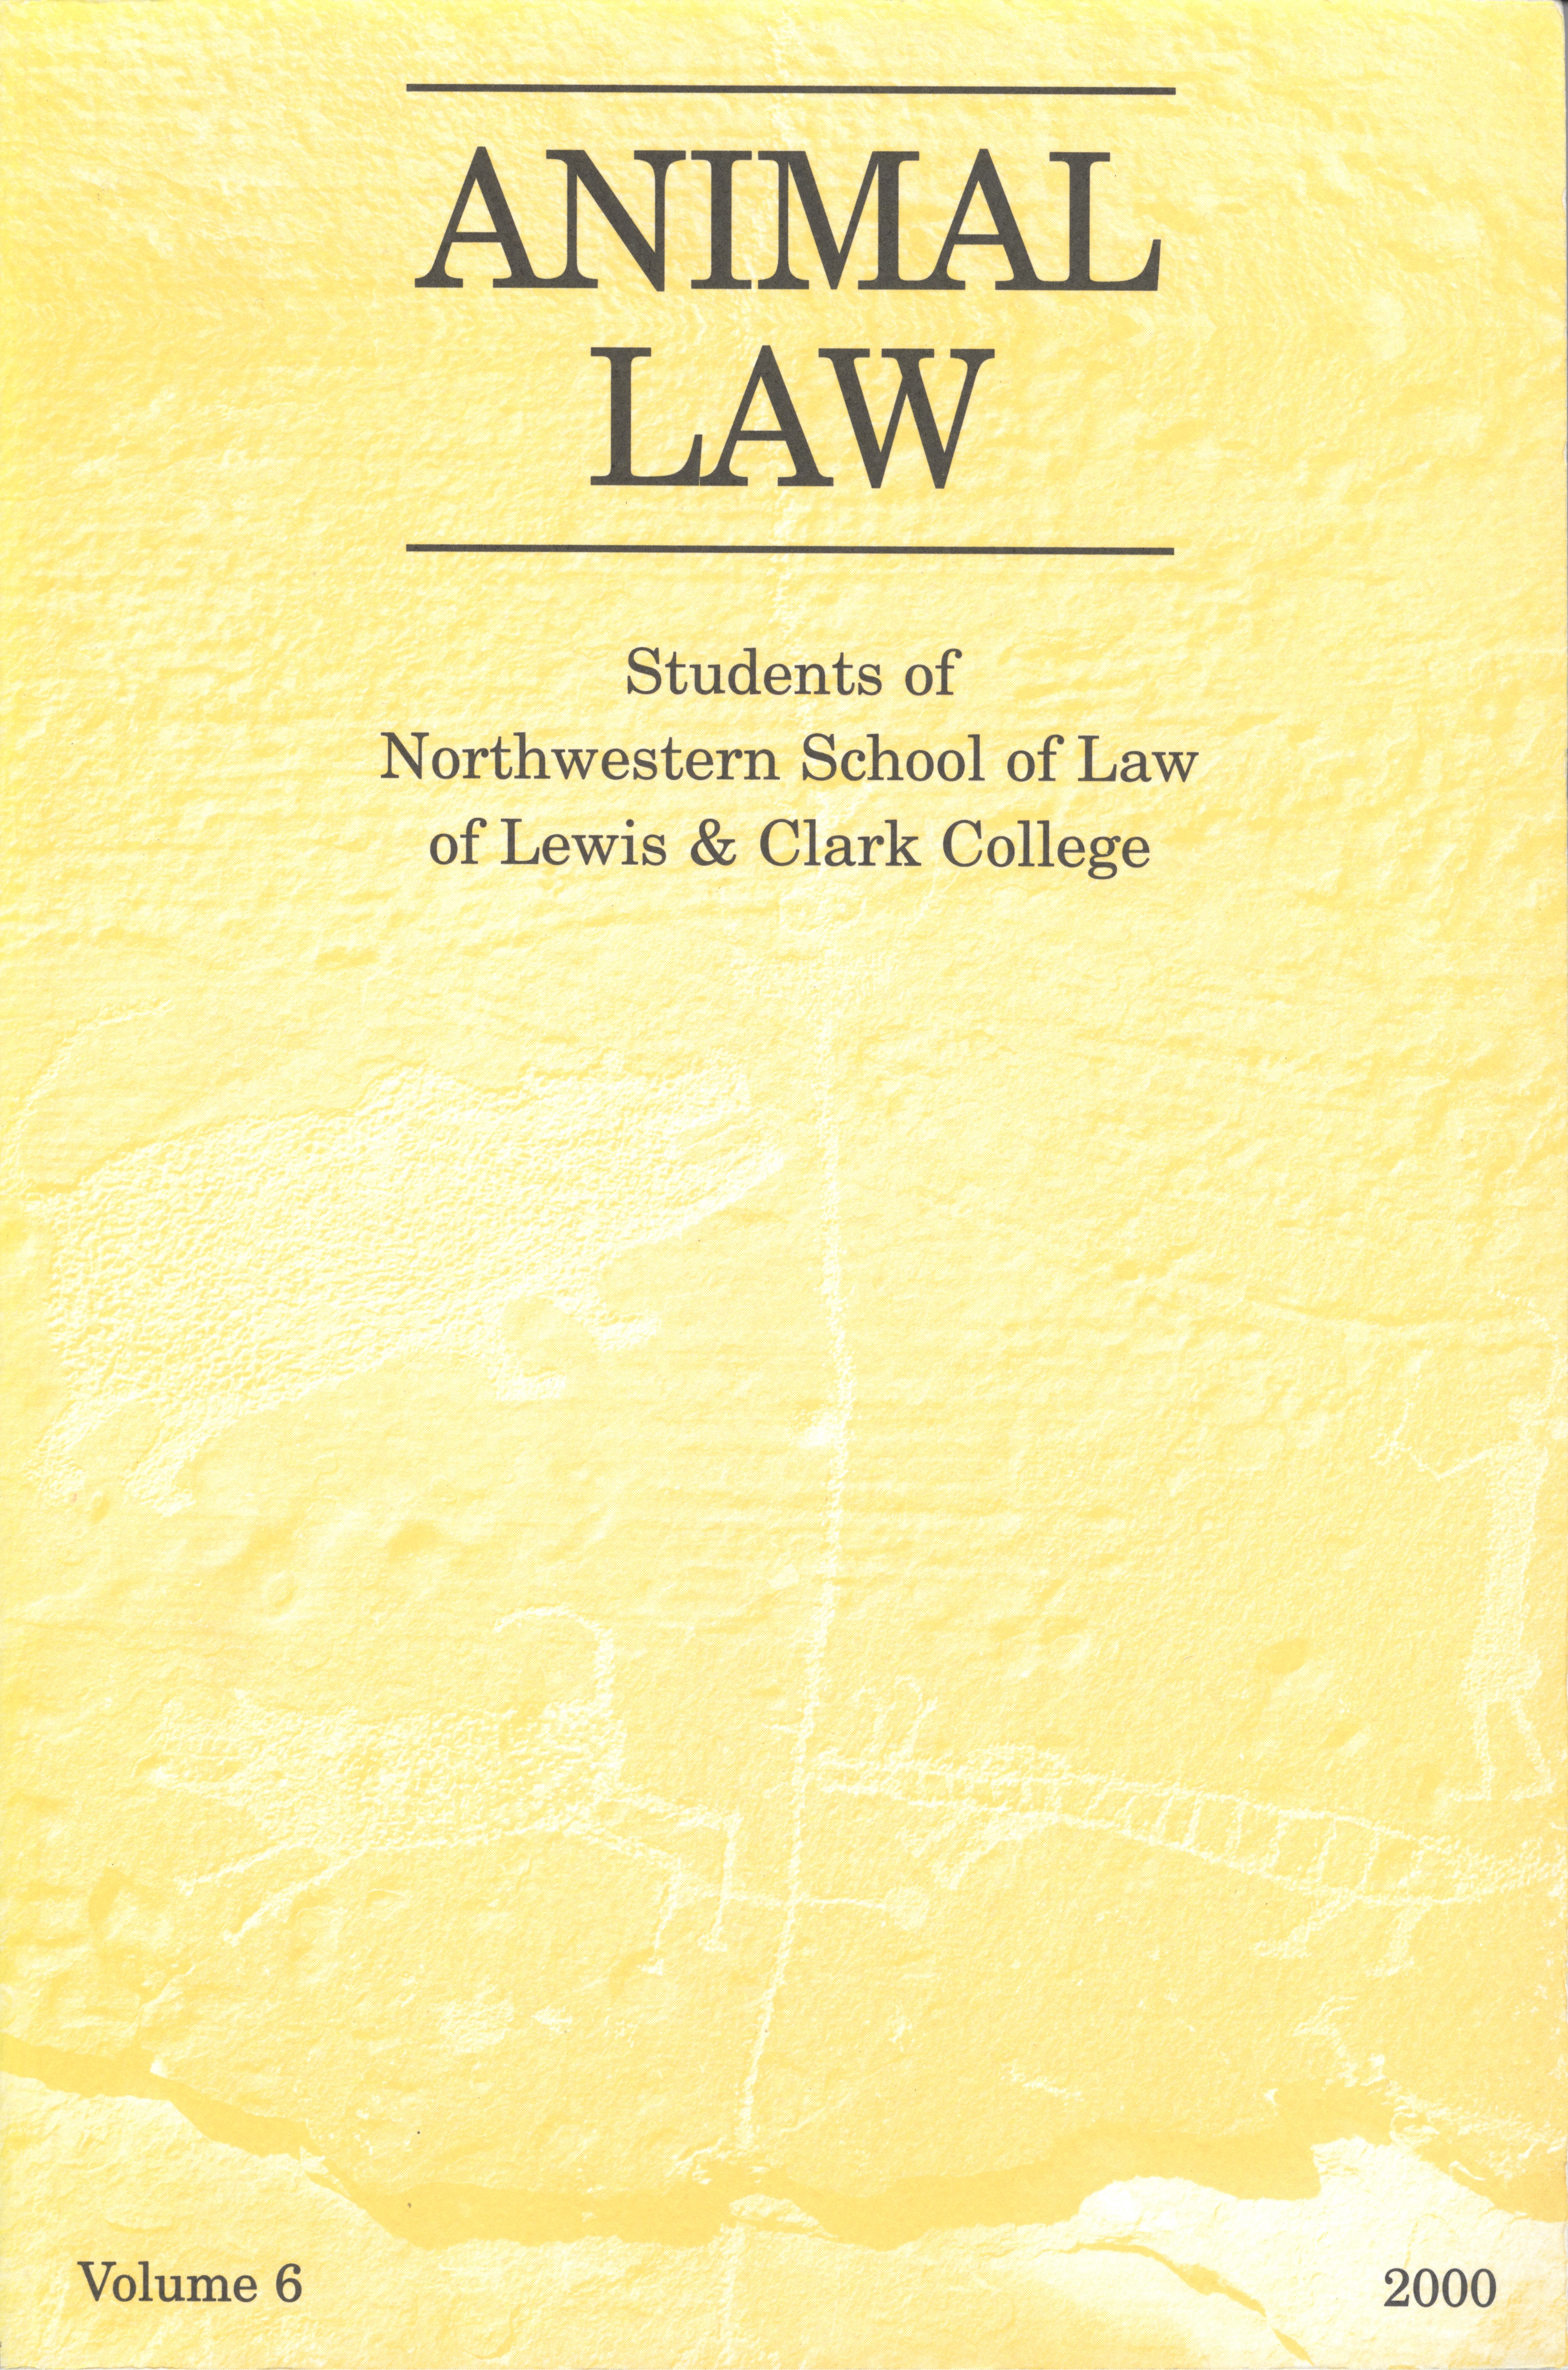 Cover of Animal Law Review Volume 6, Issue 1, 2000